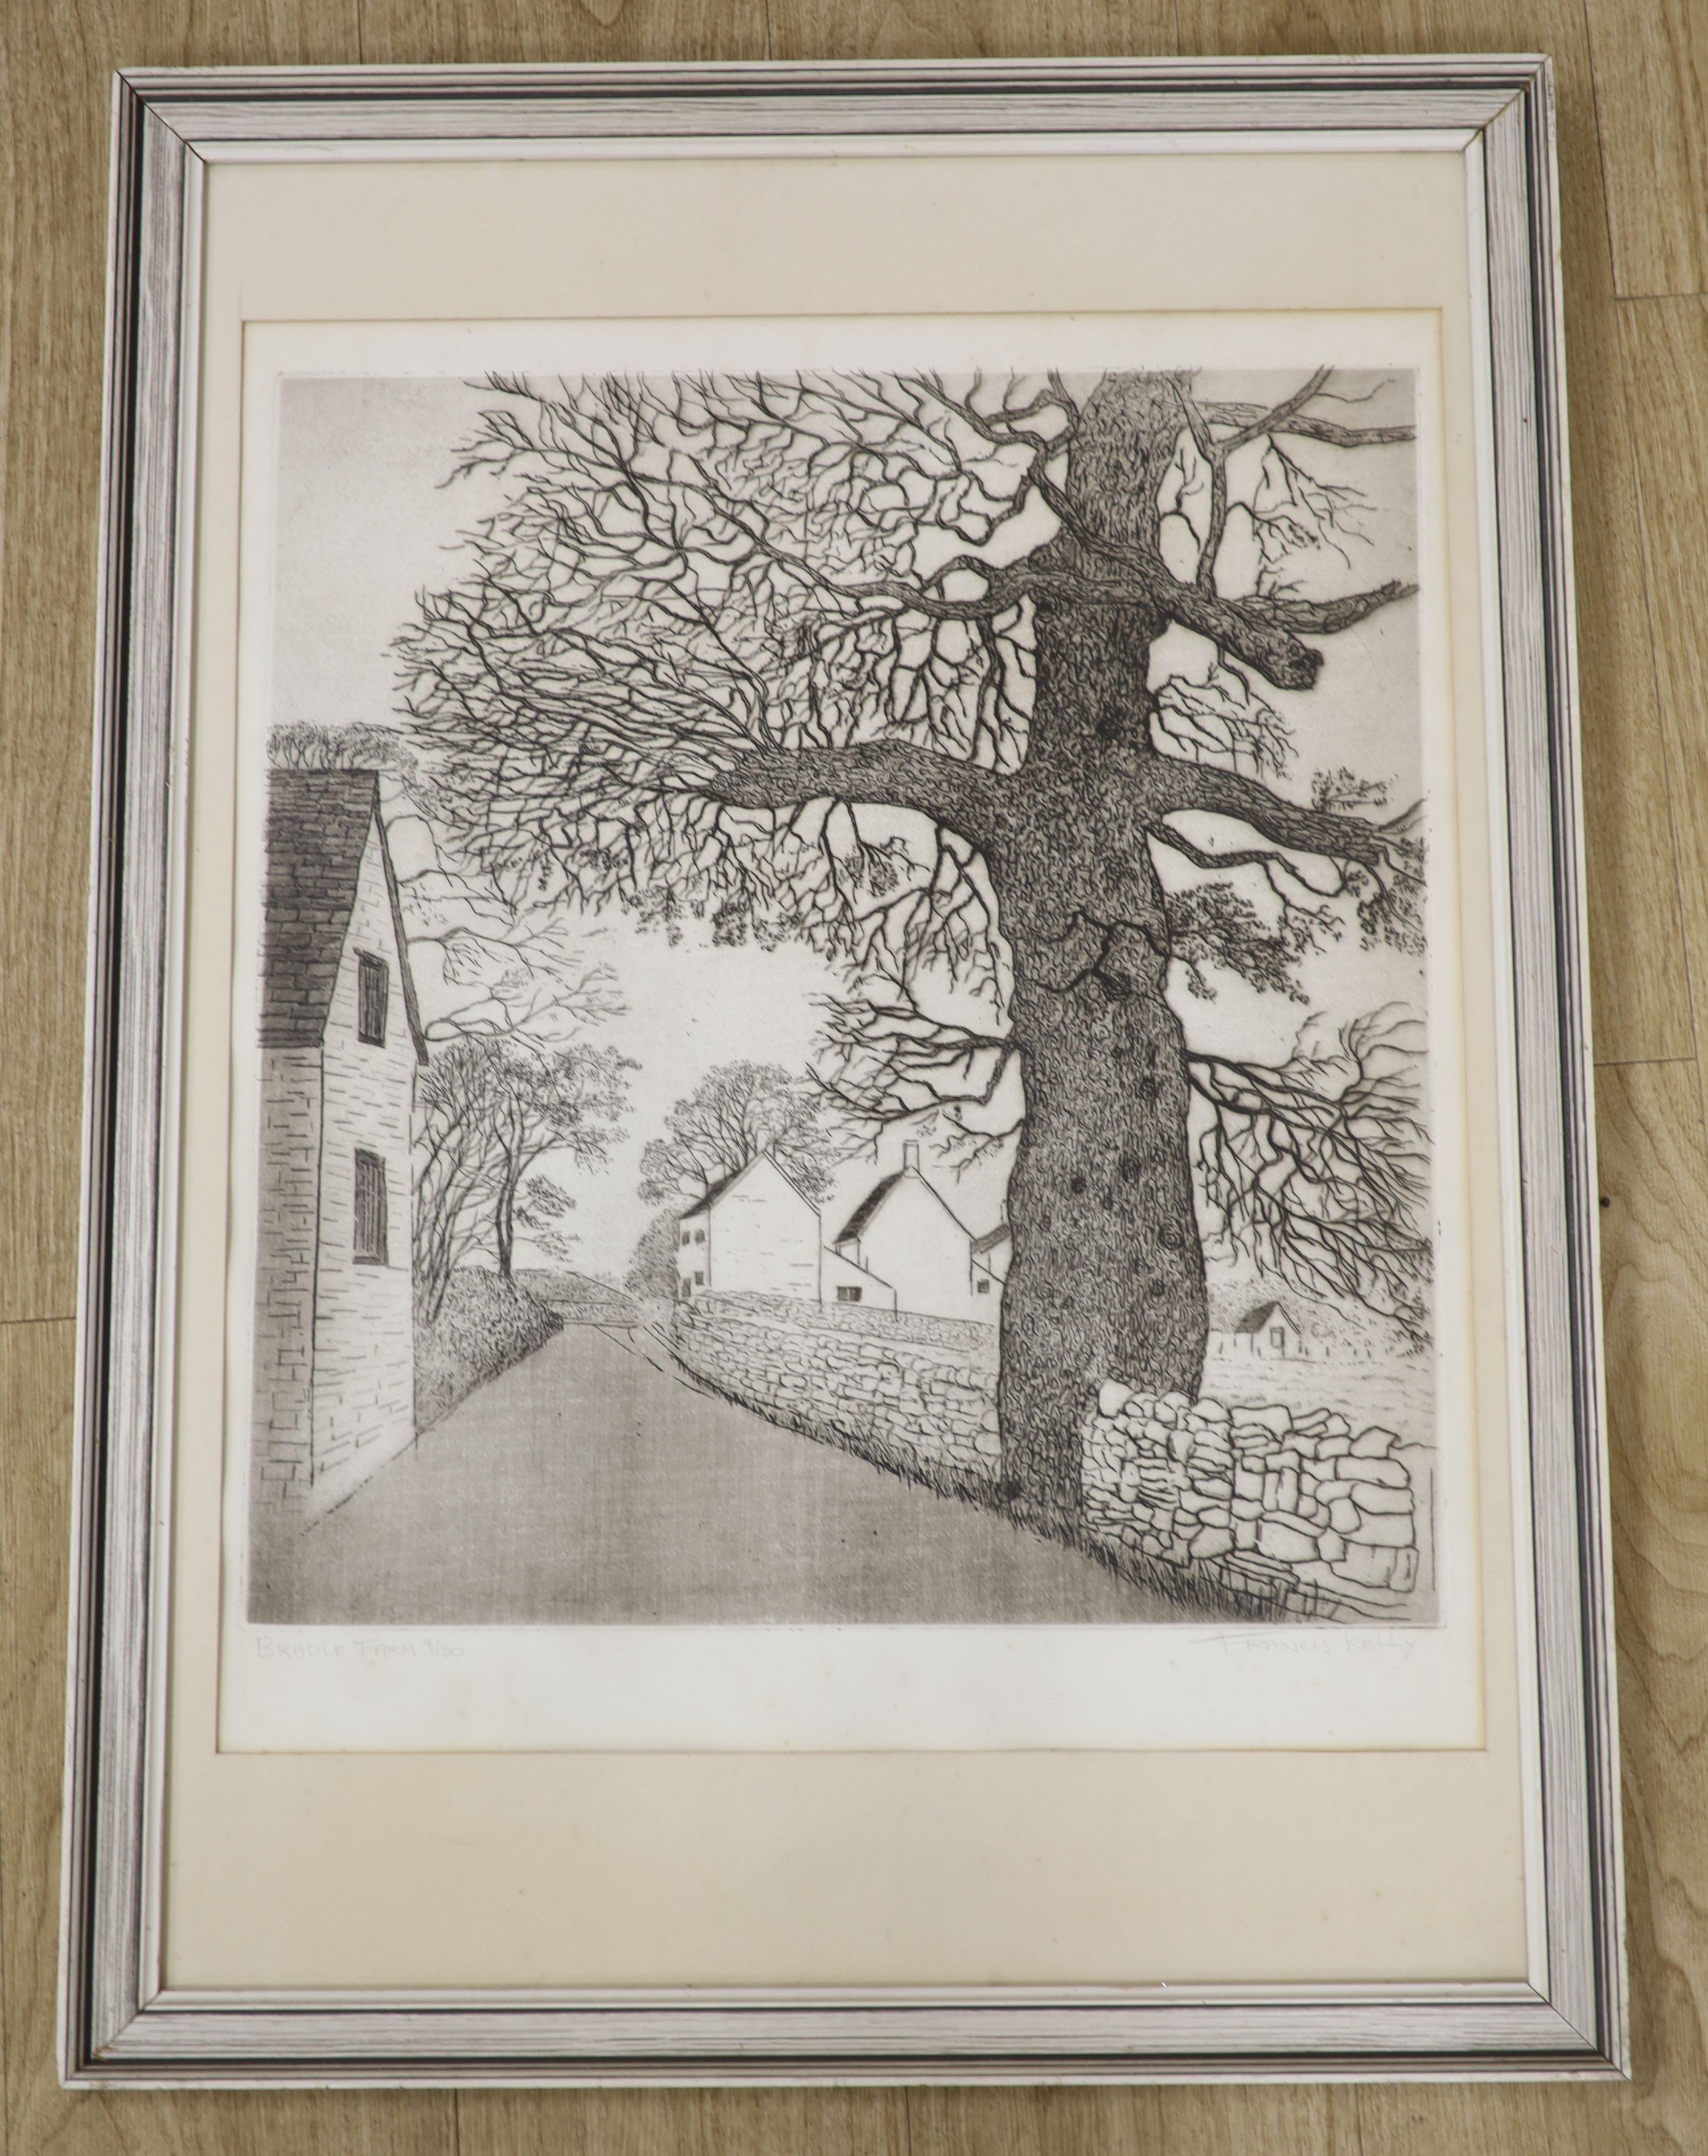 Francis Kelly (1927-2012), etching, Bradle Farm, signed in pencil, 8/50, overall 61 x 51cm